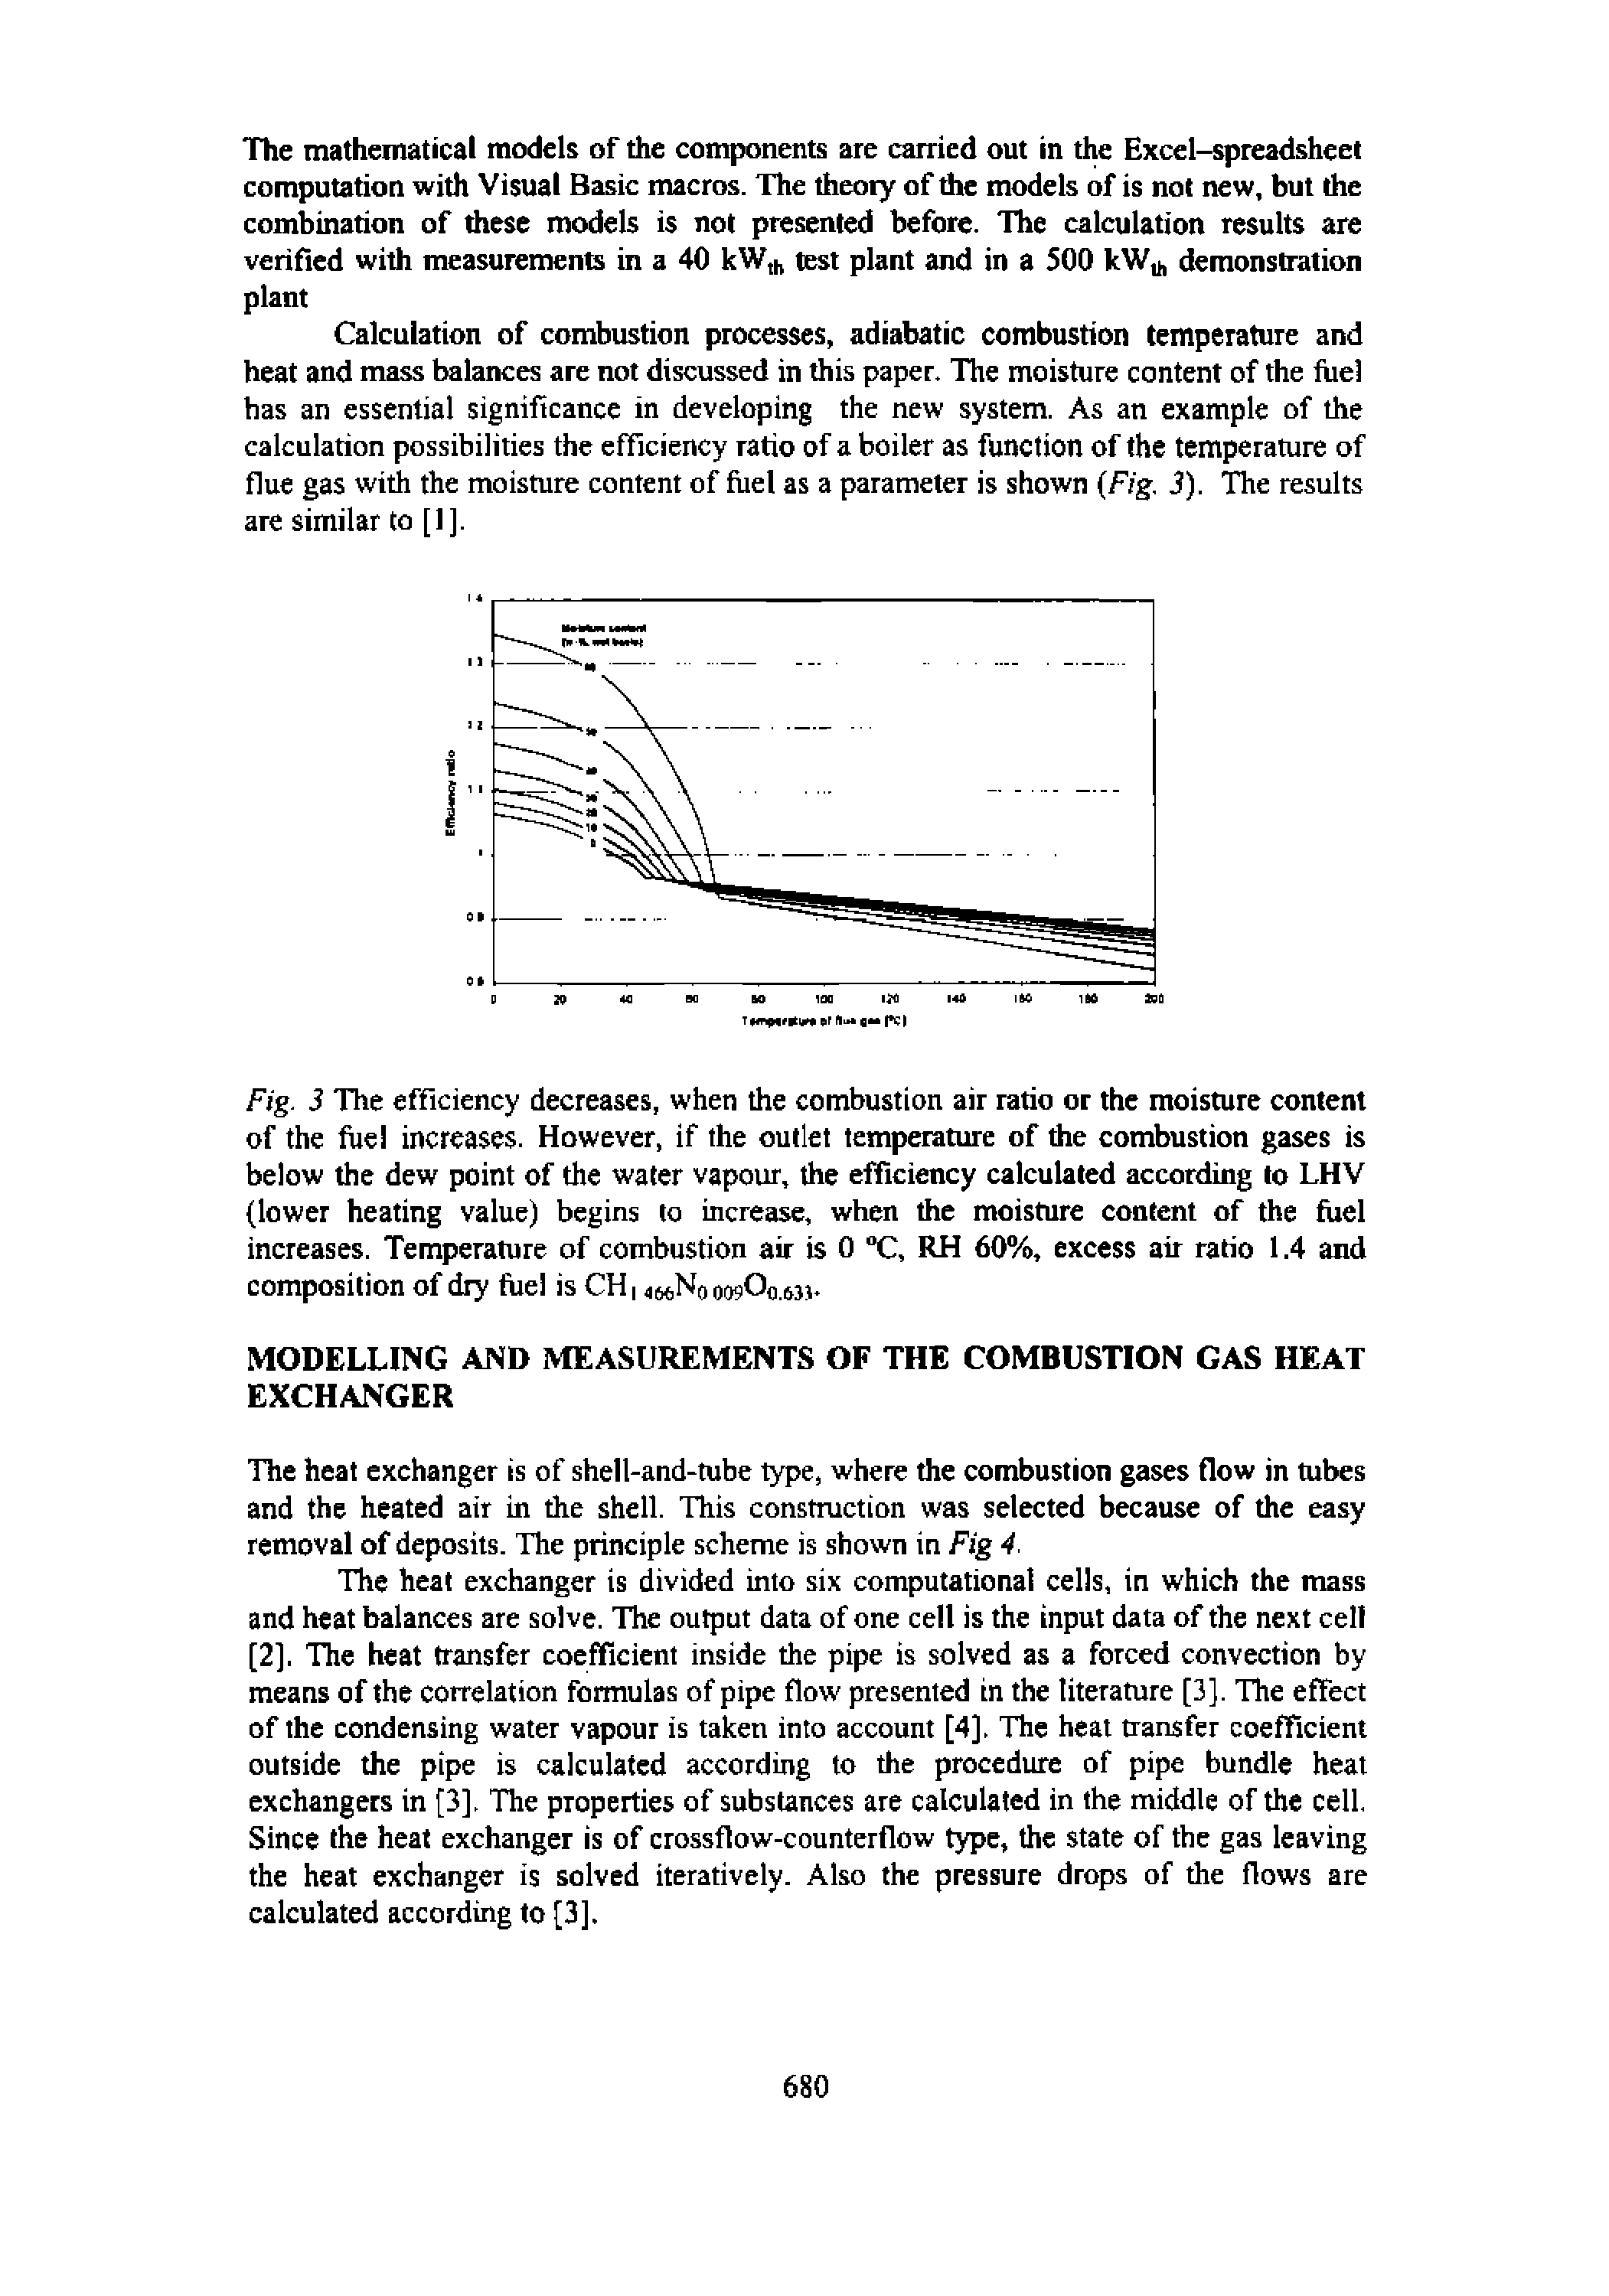 Fig. 3 The efficiency decreases, when the combustion air ratio or the moisture content of the fuel increases. However, if the outlet temperature of the combustion gases is below the dew point of the water vapour, the efficiency calculated according to LHV lower heating value) begins to increase, when the moisture content of the fuel increases. Temperature of combustion air is 0 C, RH 60%, excess air ratio 1.4 and composition of dry fuel is CH i owOo.m).